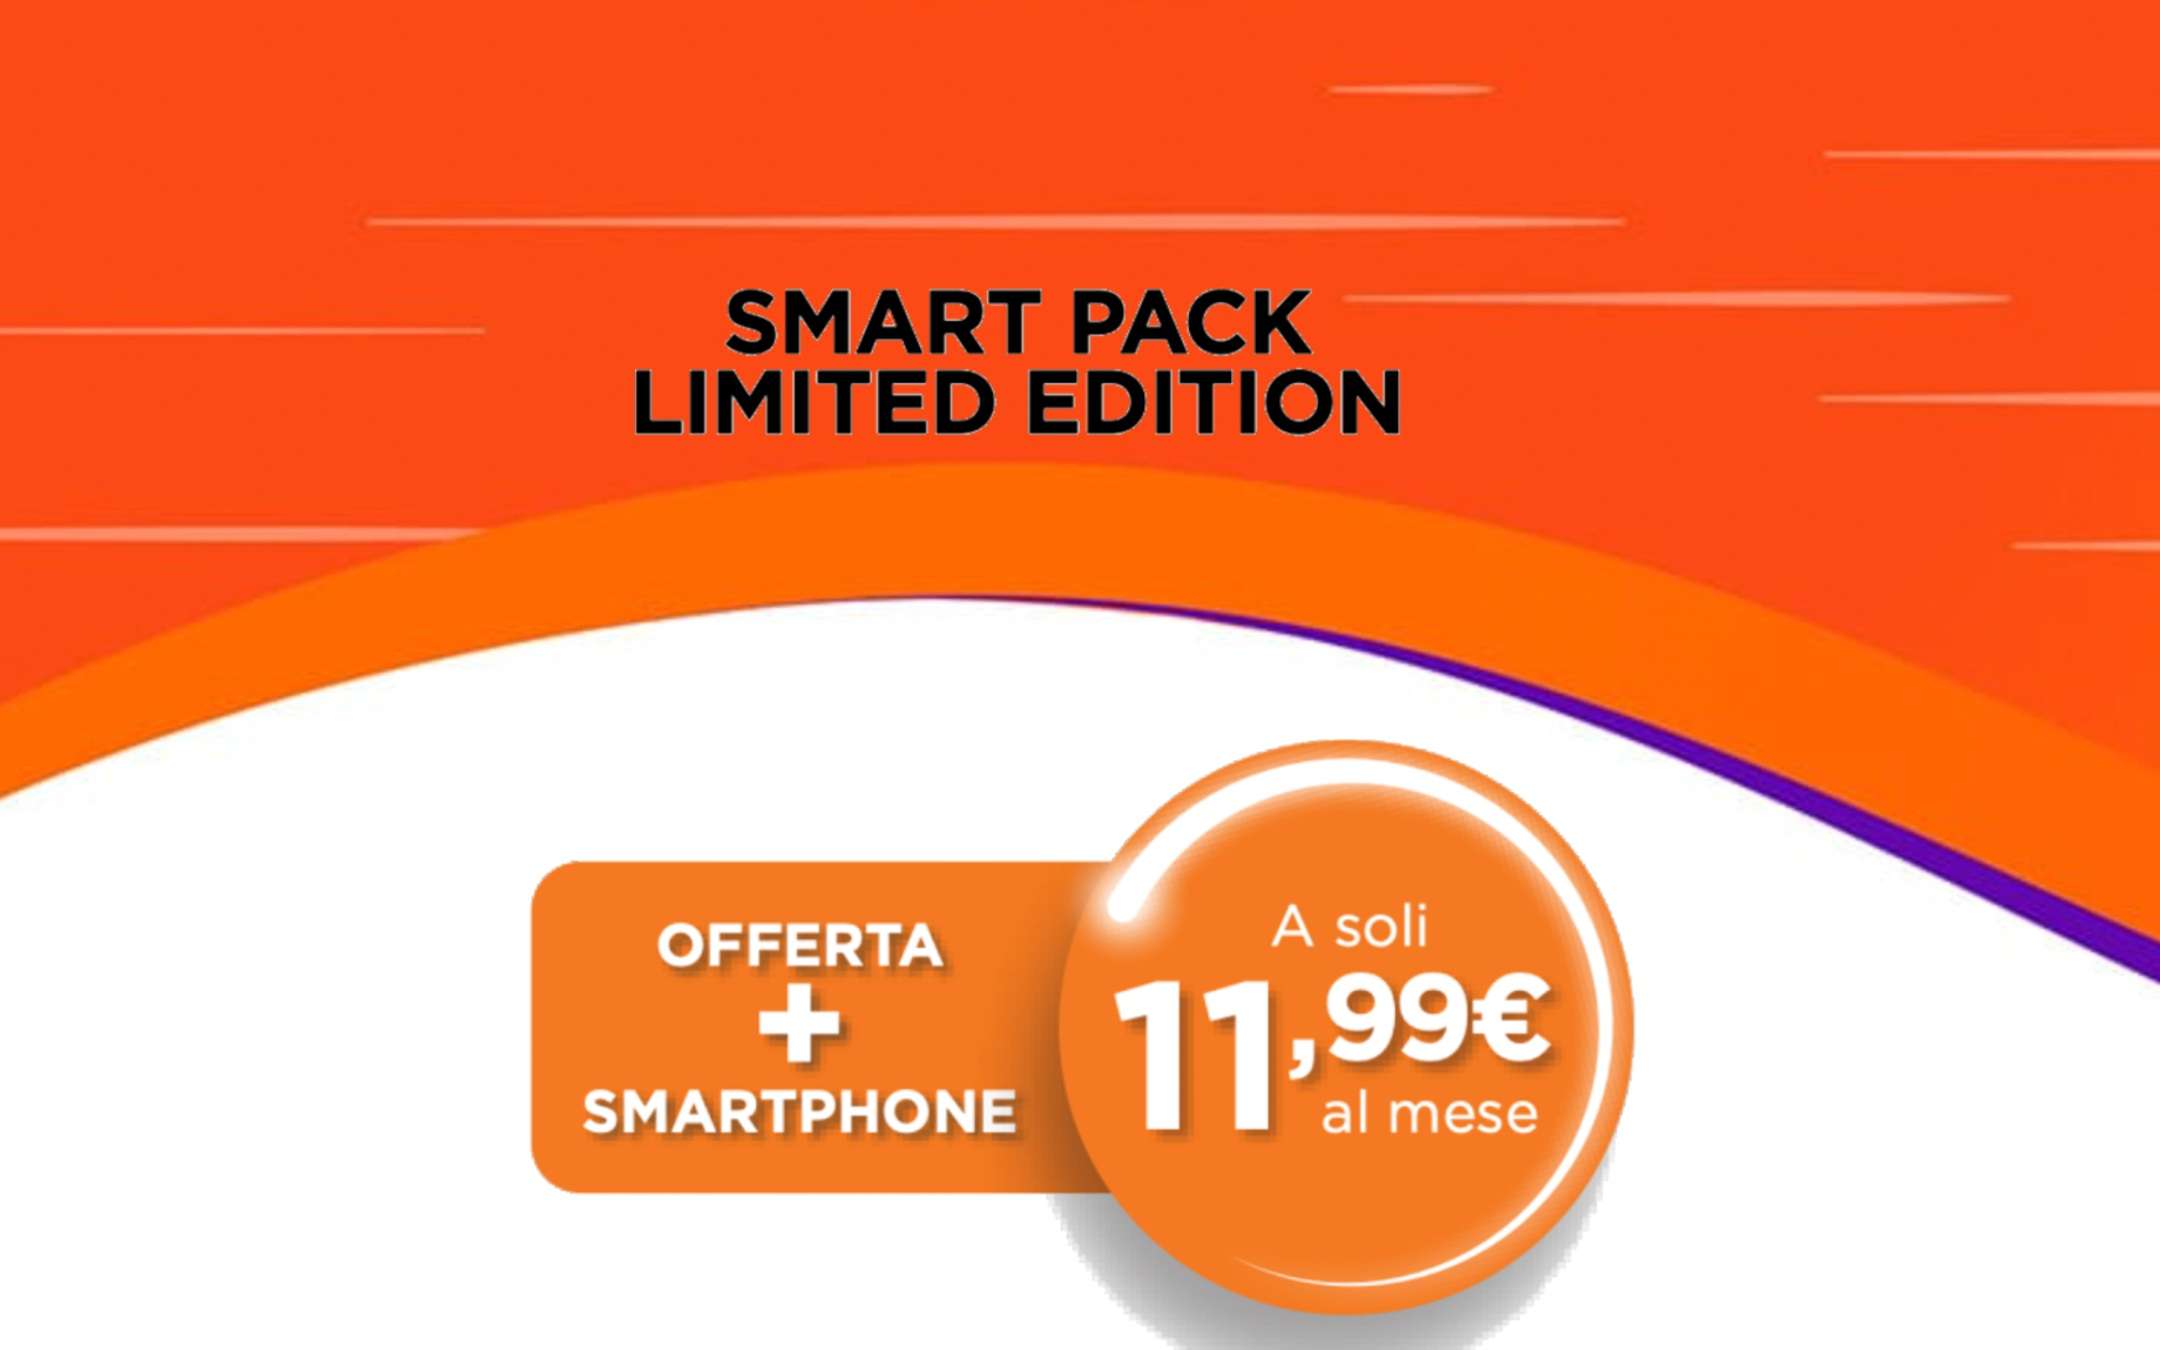 Smart Pack Limited Edition con smartphone a 11,99€